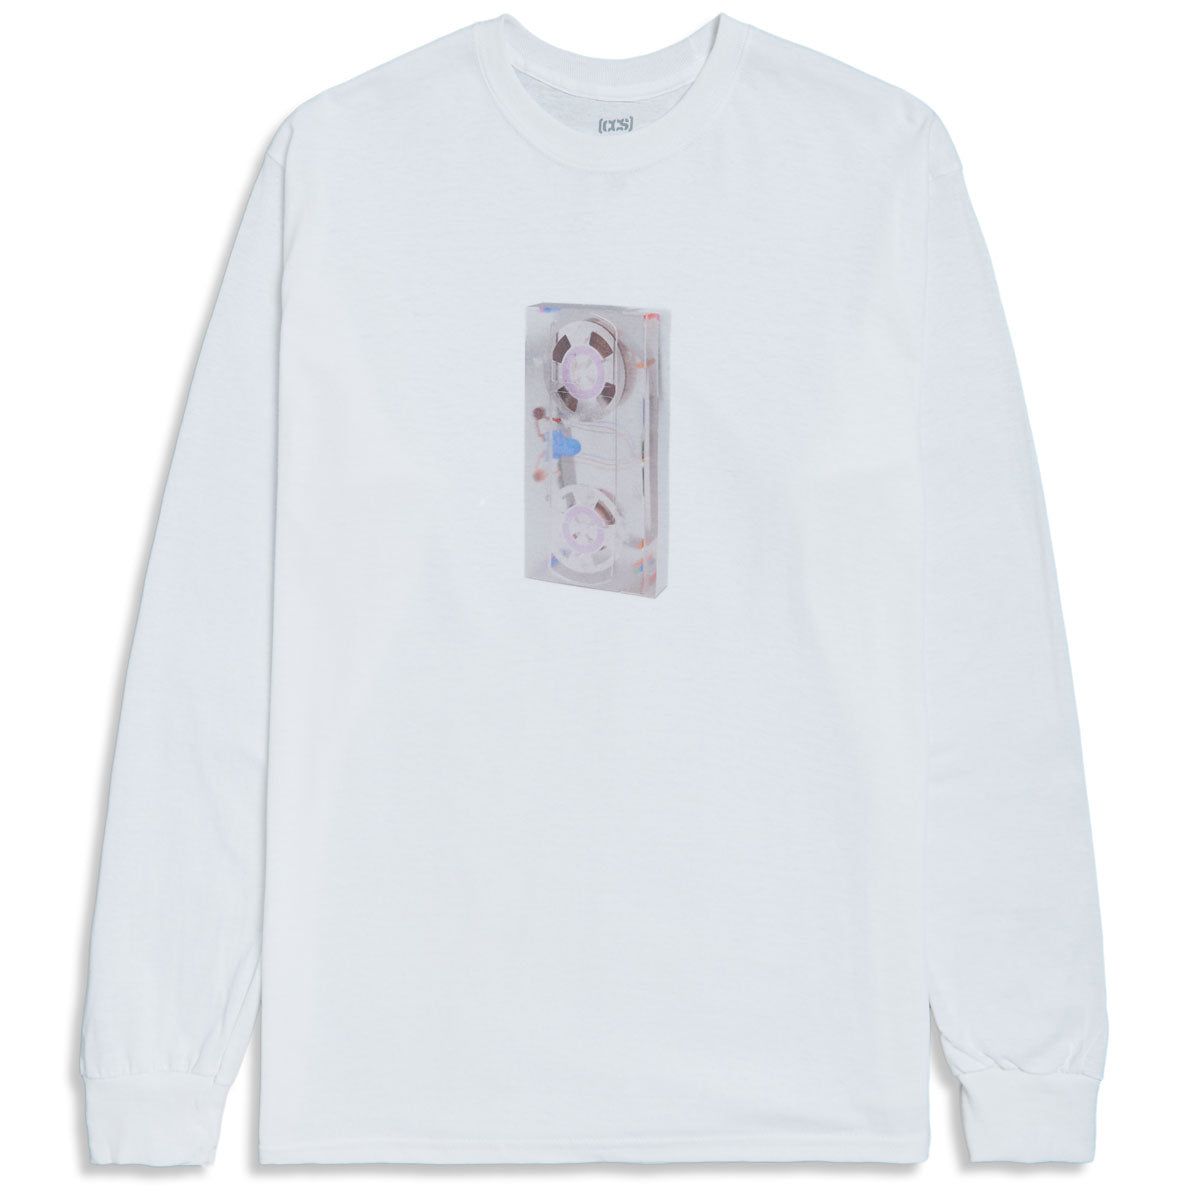 CCS Going Clear VHS Long Sleeve T-Shirt - White image 1